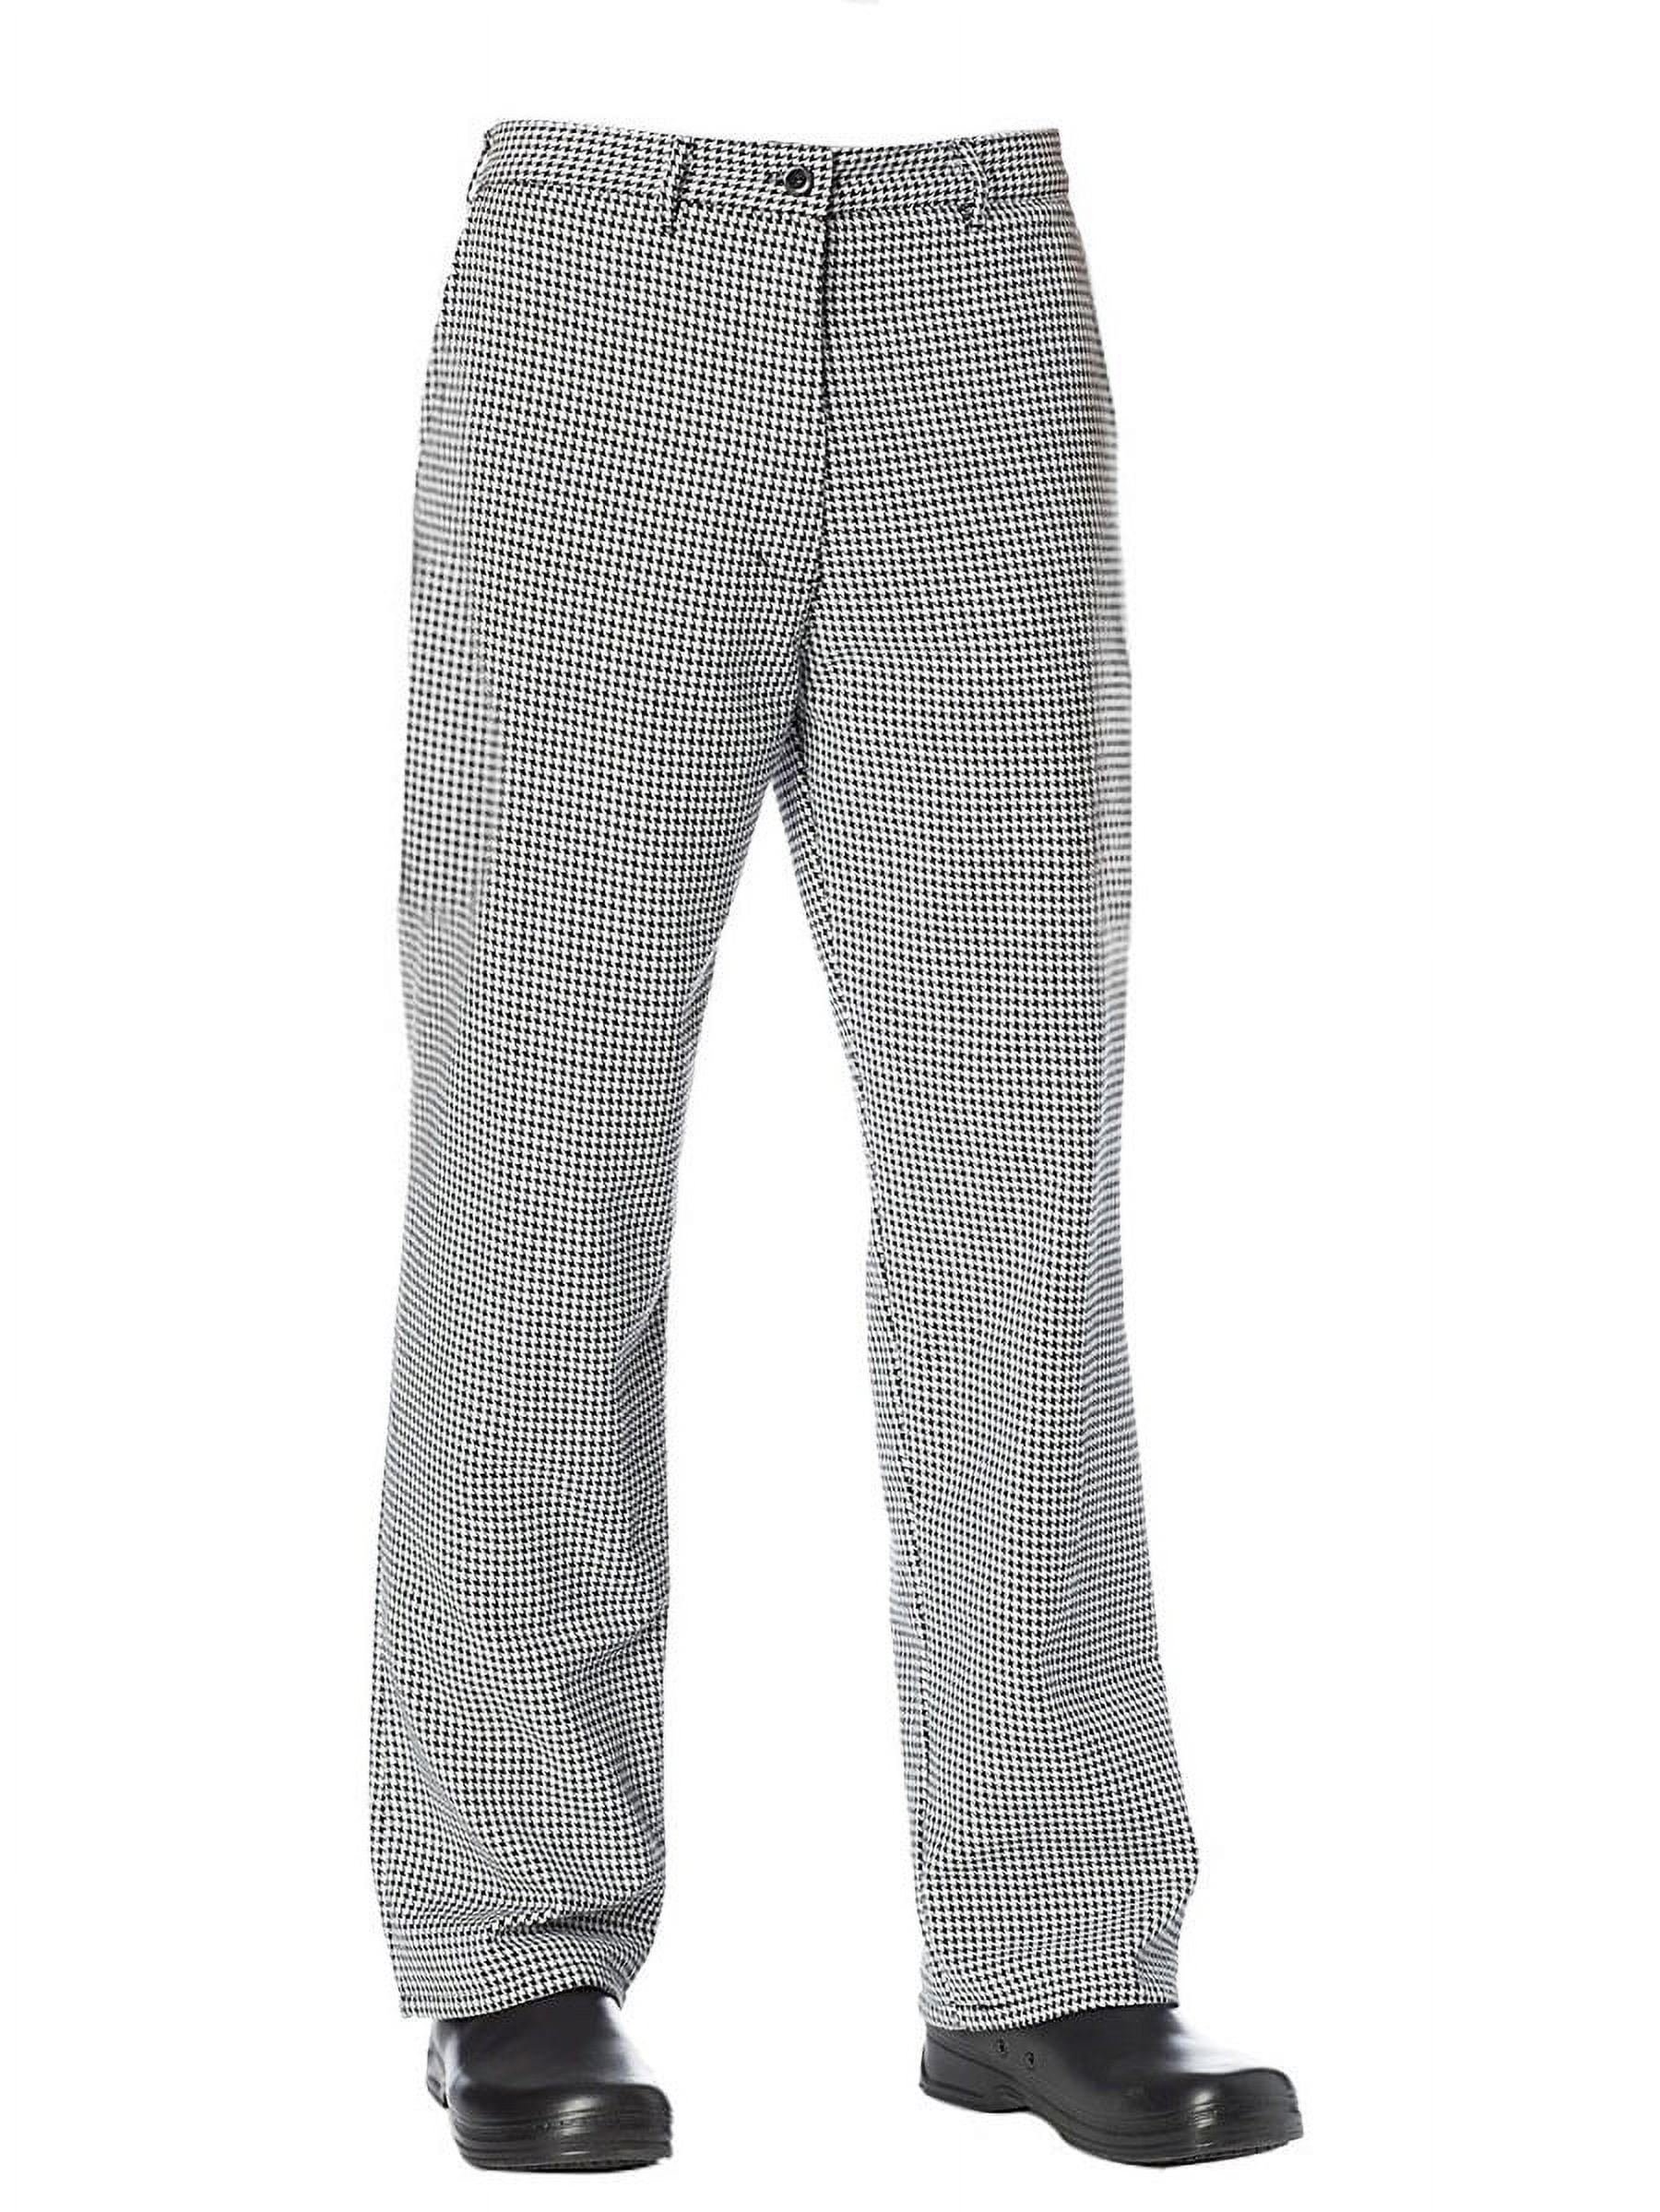 CHEF CODE The Professional Chef Pant with Belt Loops and Zipper Fly, CC223  